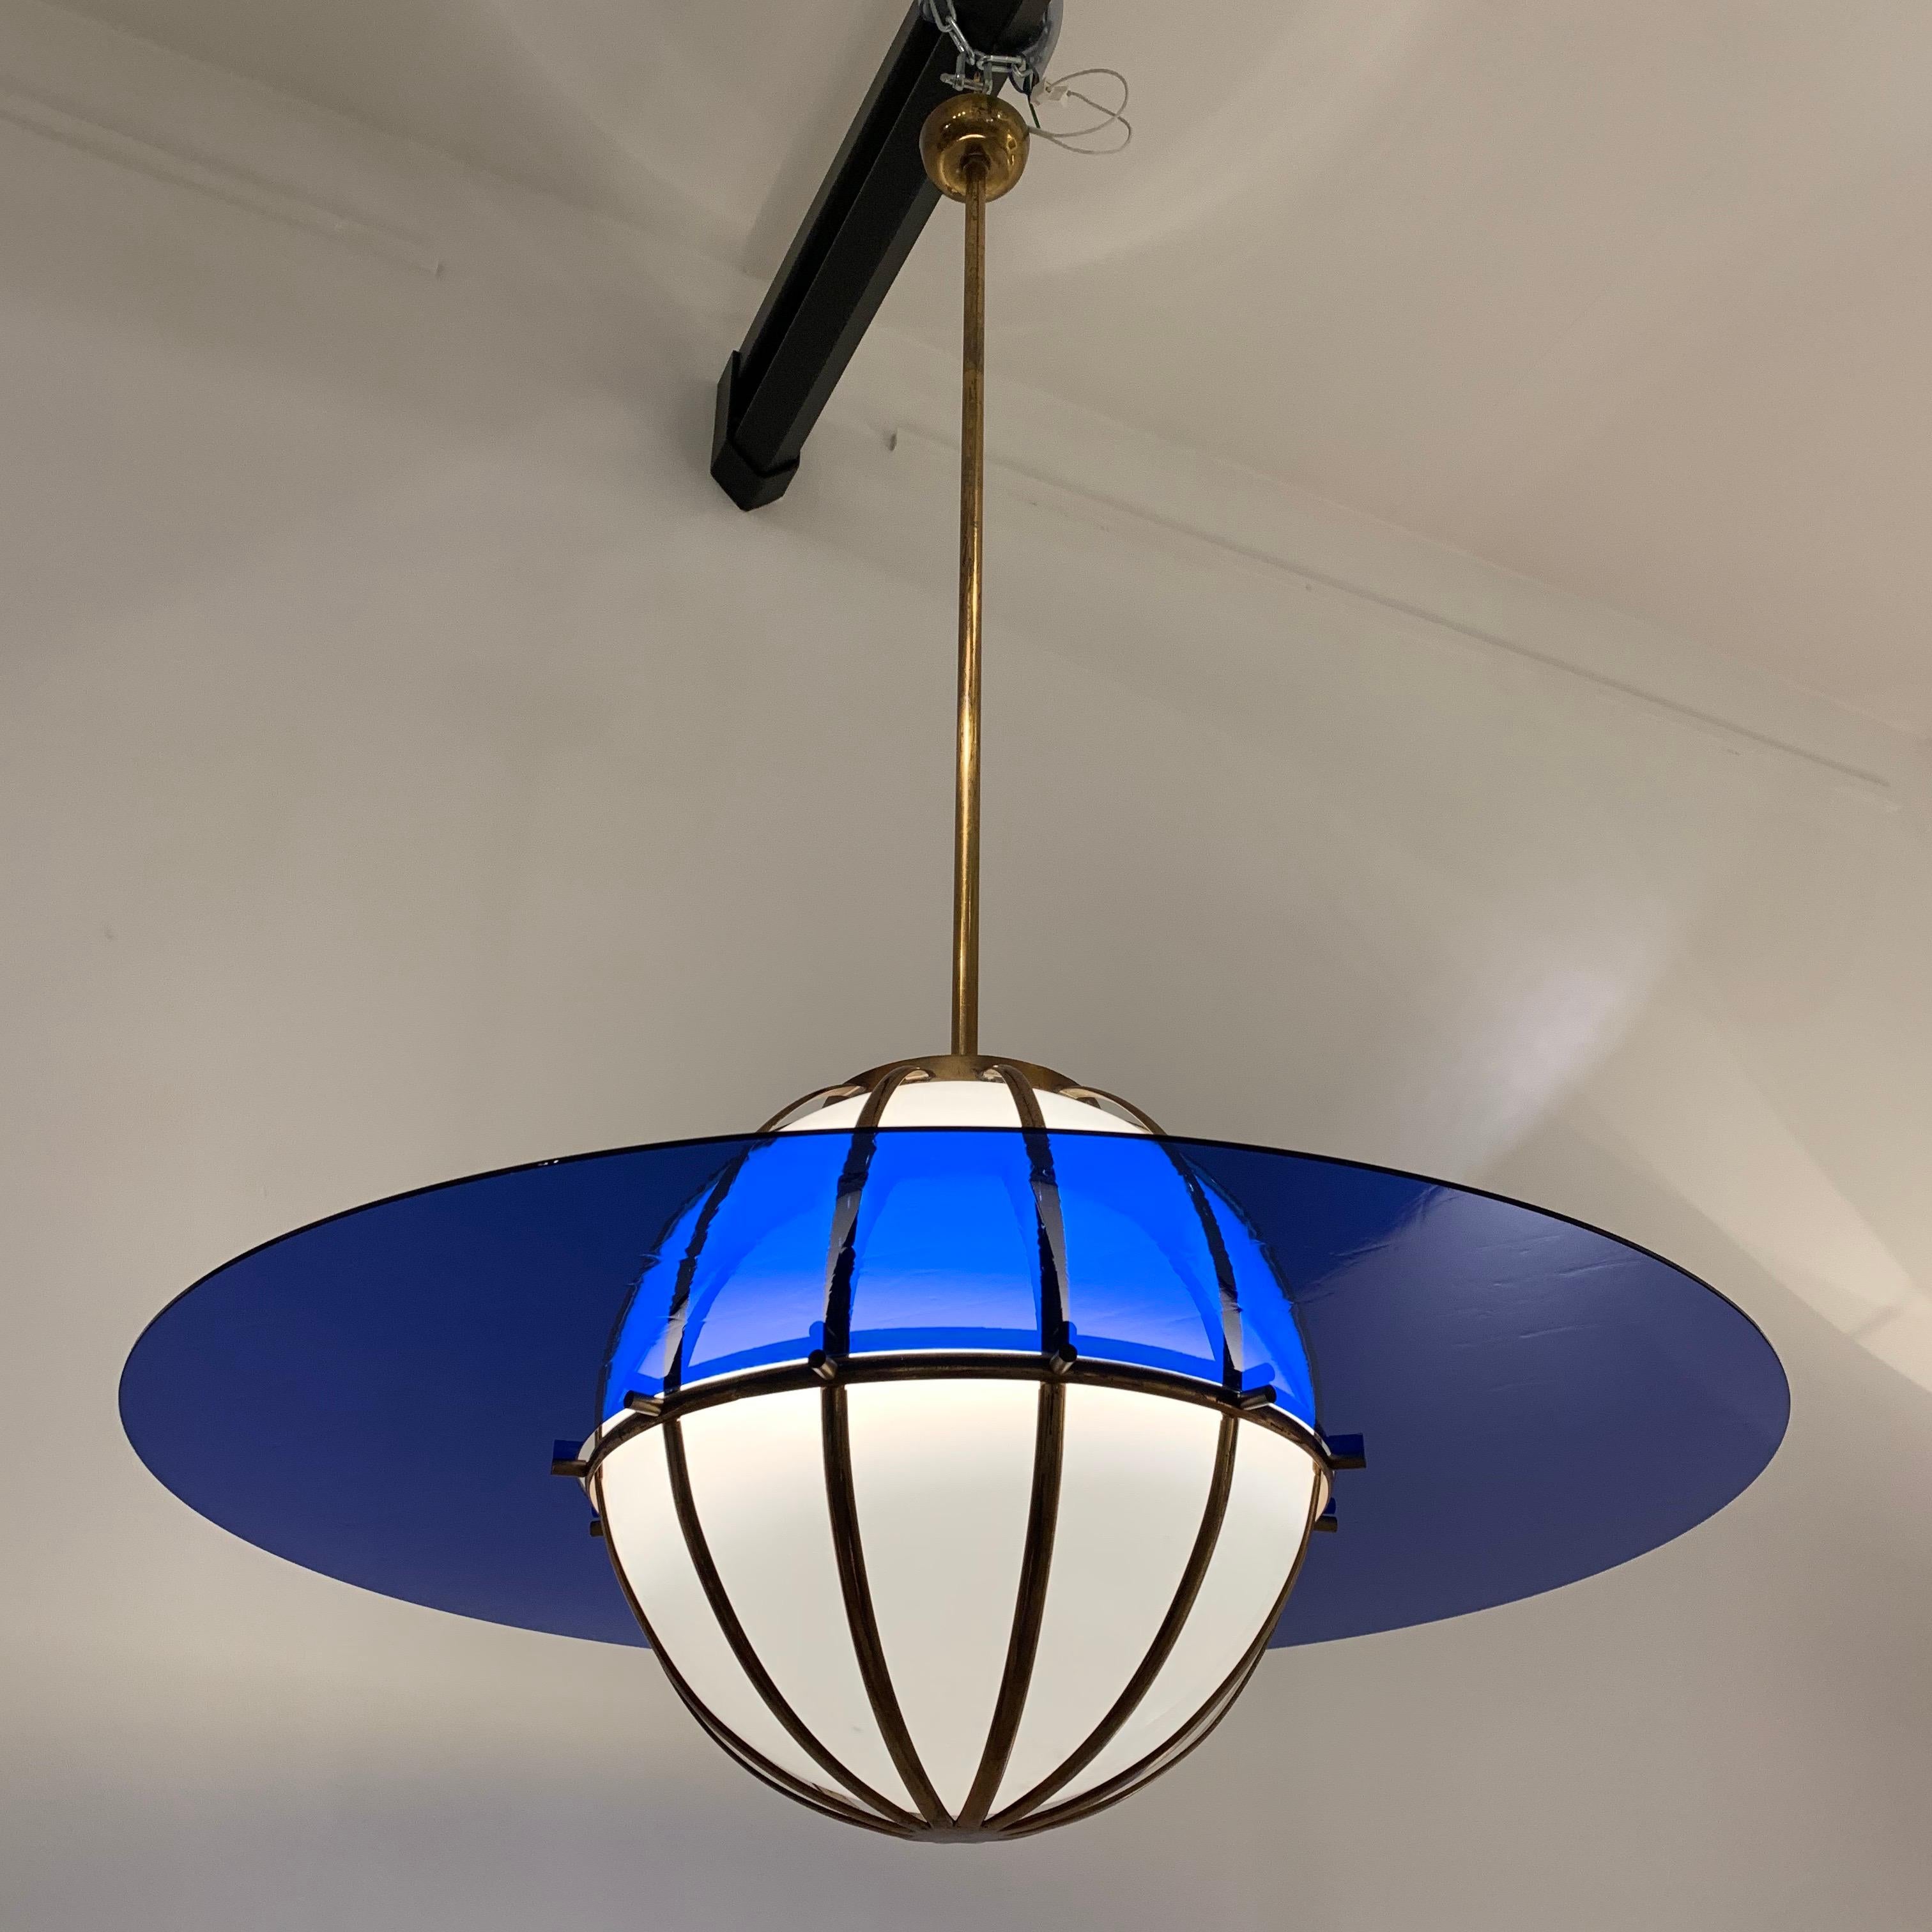 The lantern is a creation that dates back to the first decade of the year two thousand. It is of great quality and inspired by previous Italian lighting designer such as Angelo Lelli, and contemporary designer Roberto Rida. The striking coloration